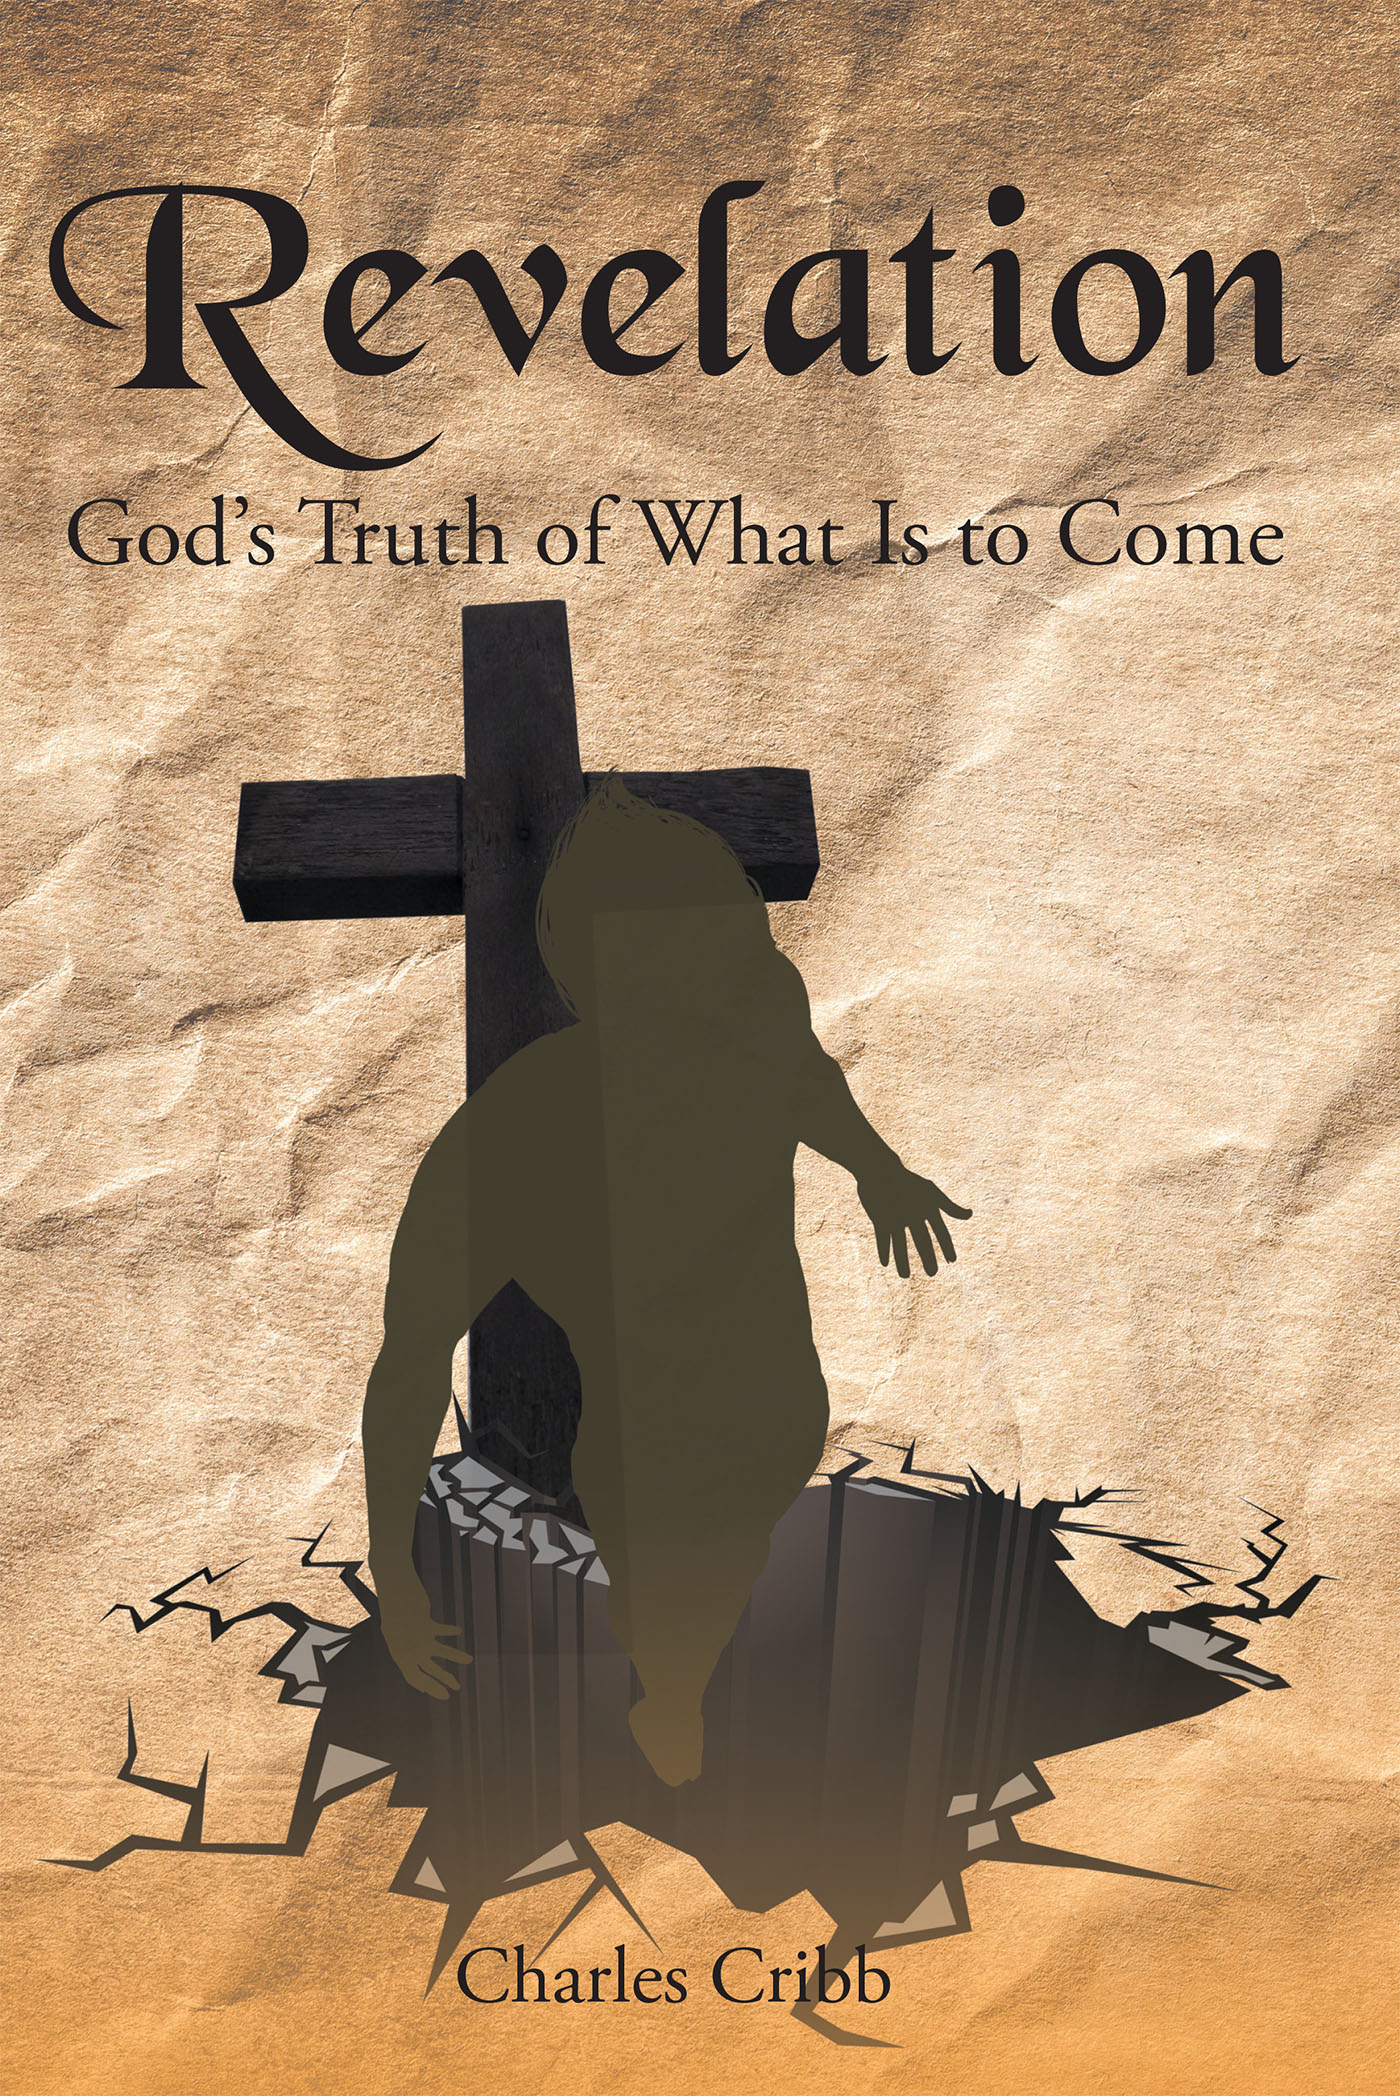 Charles Cribb’s Newly Released “Revelation: God’s Truth of What Is to Come” is a Detailed Study of the Book of Revelation